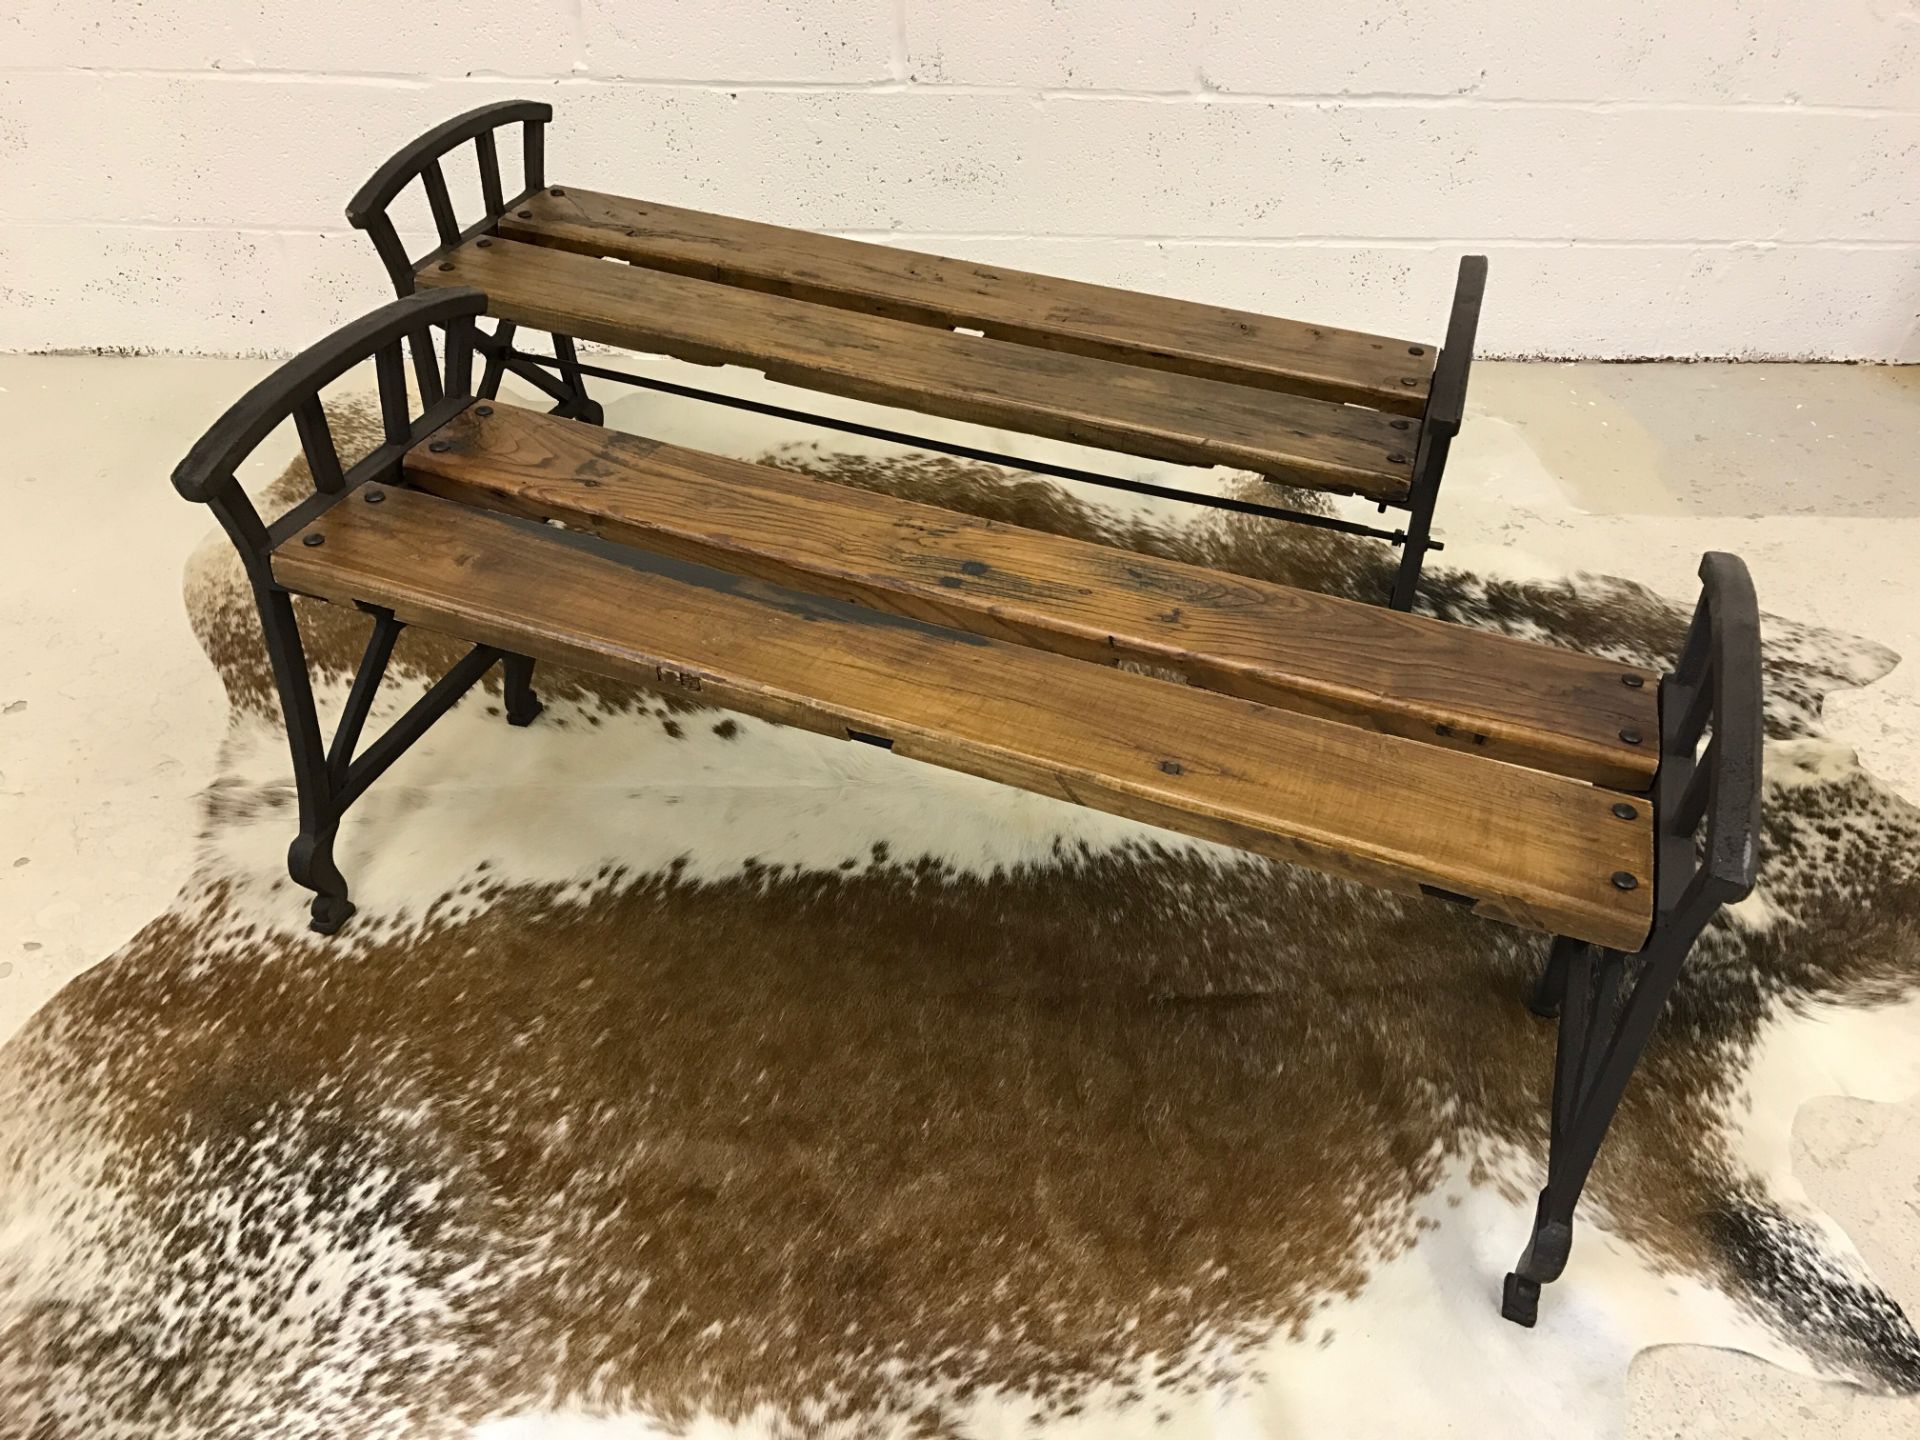 Pair of rustic benches with cast iron ends